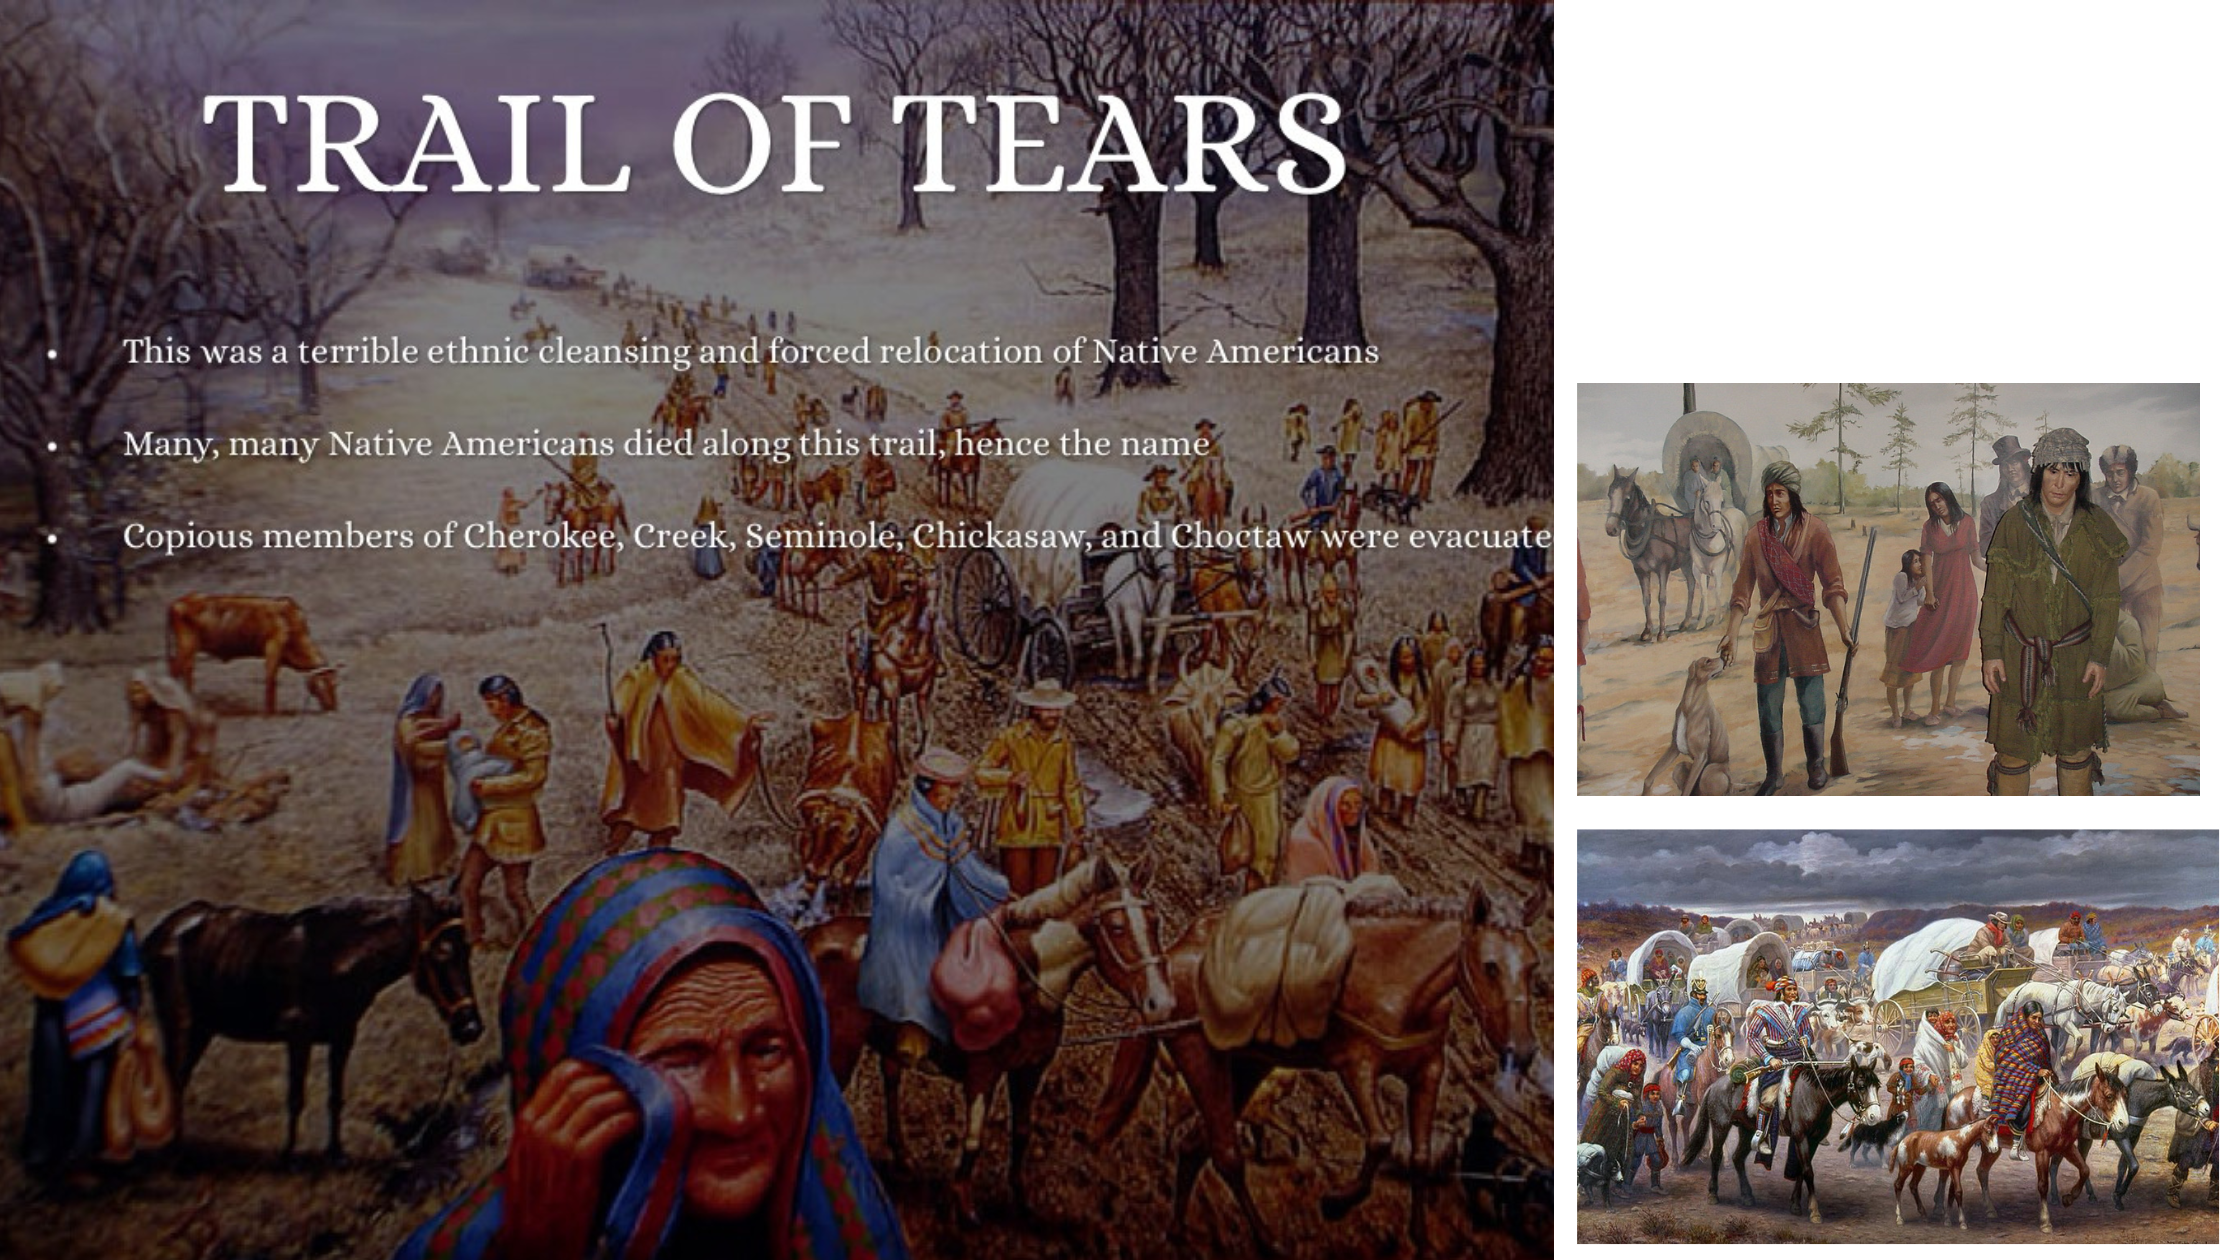 The Trail of Tears: Native American Forced Relocation